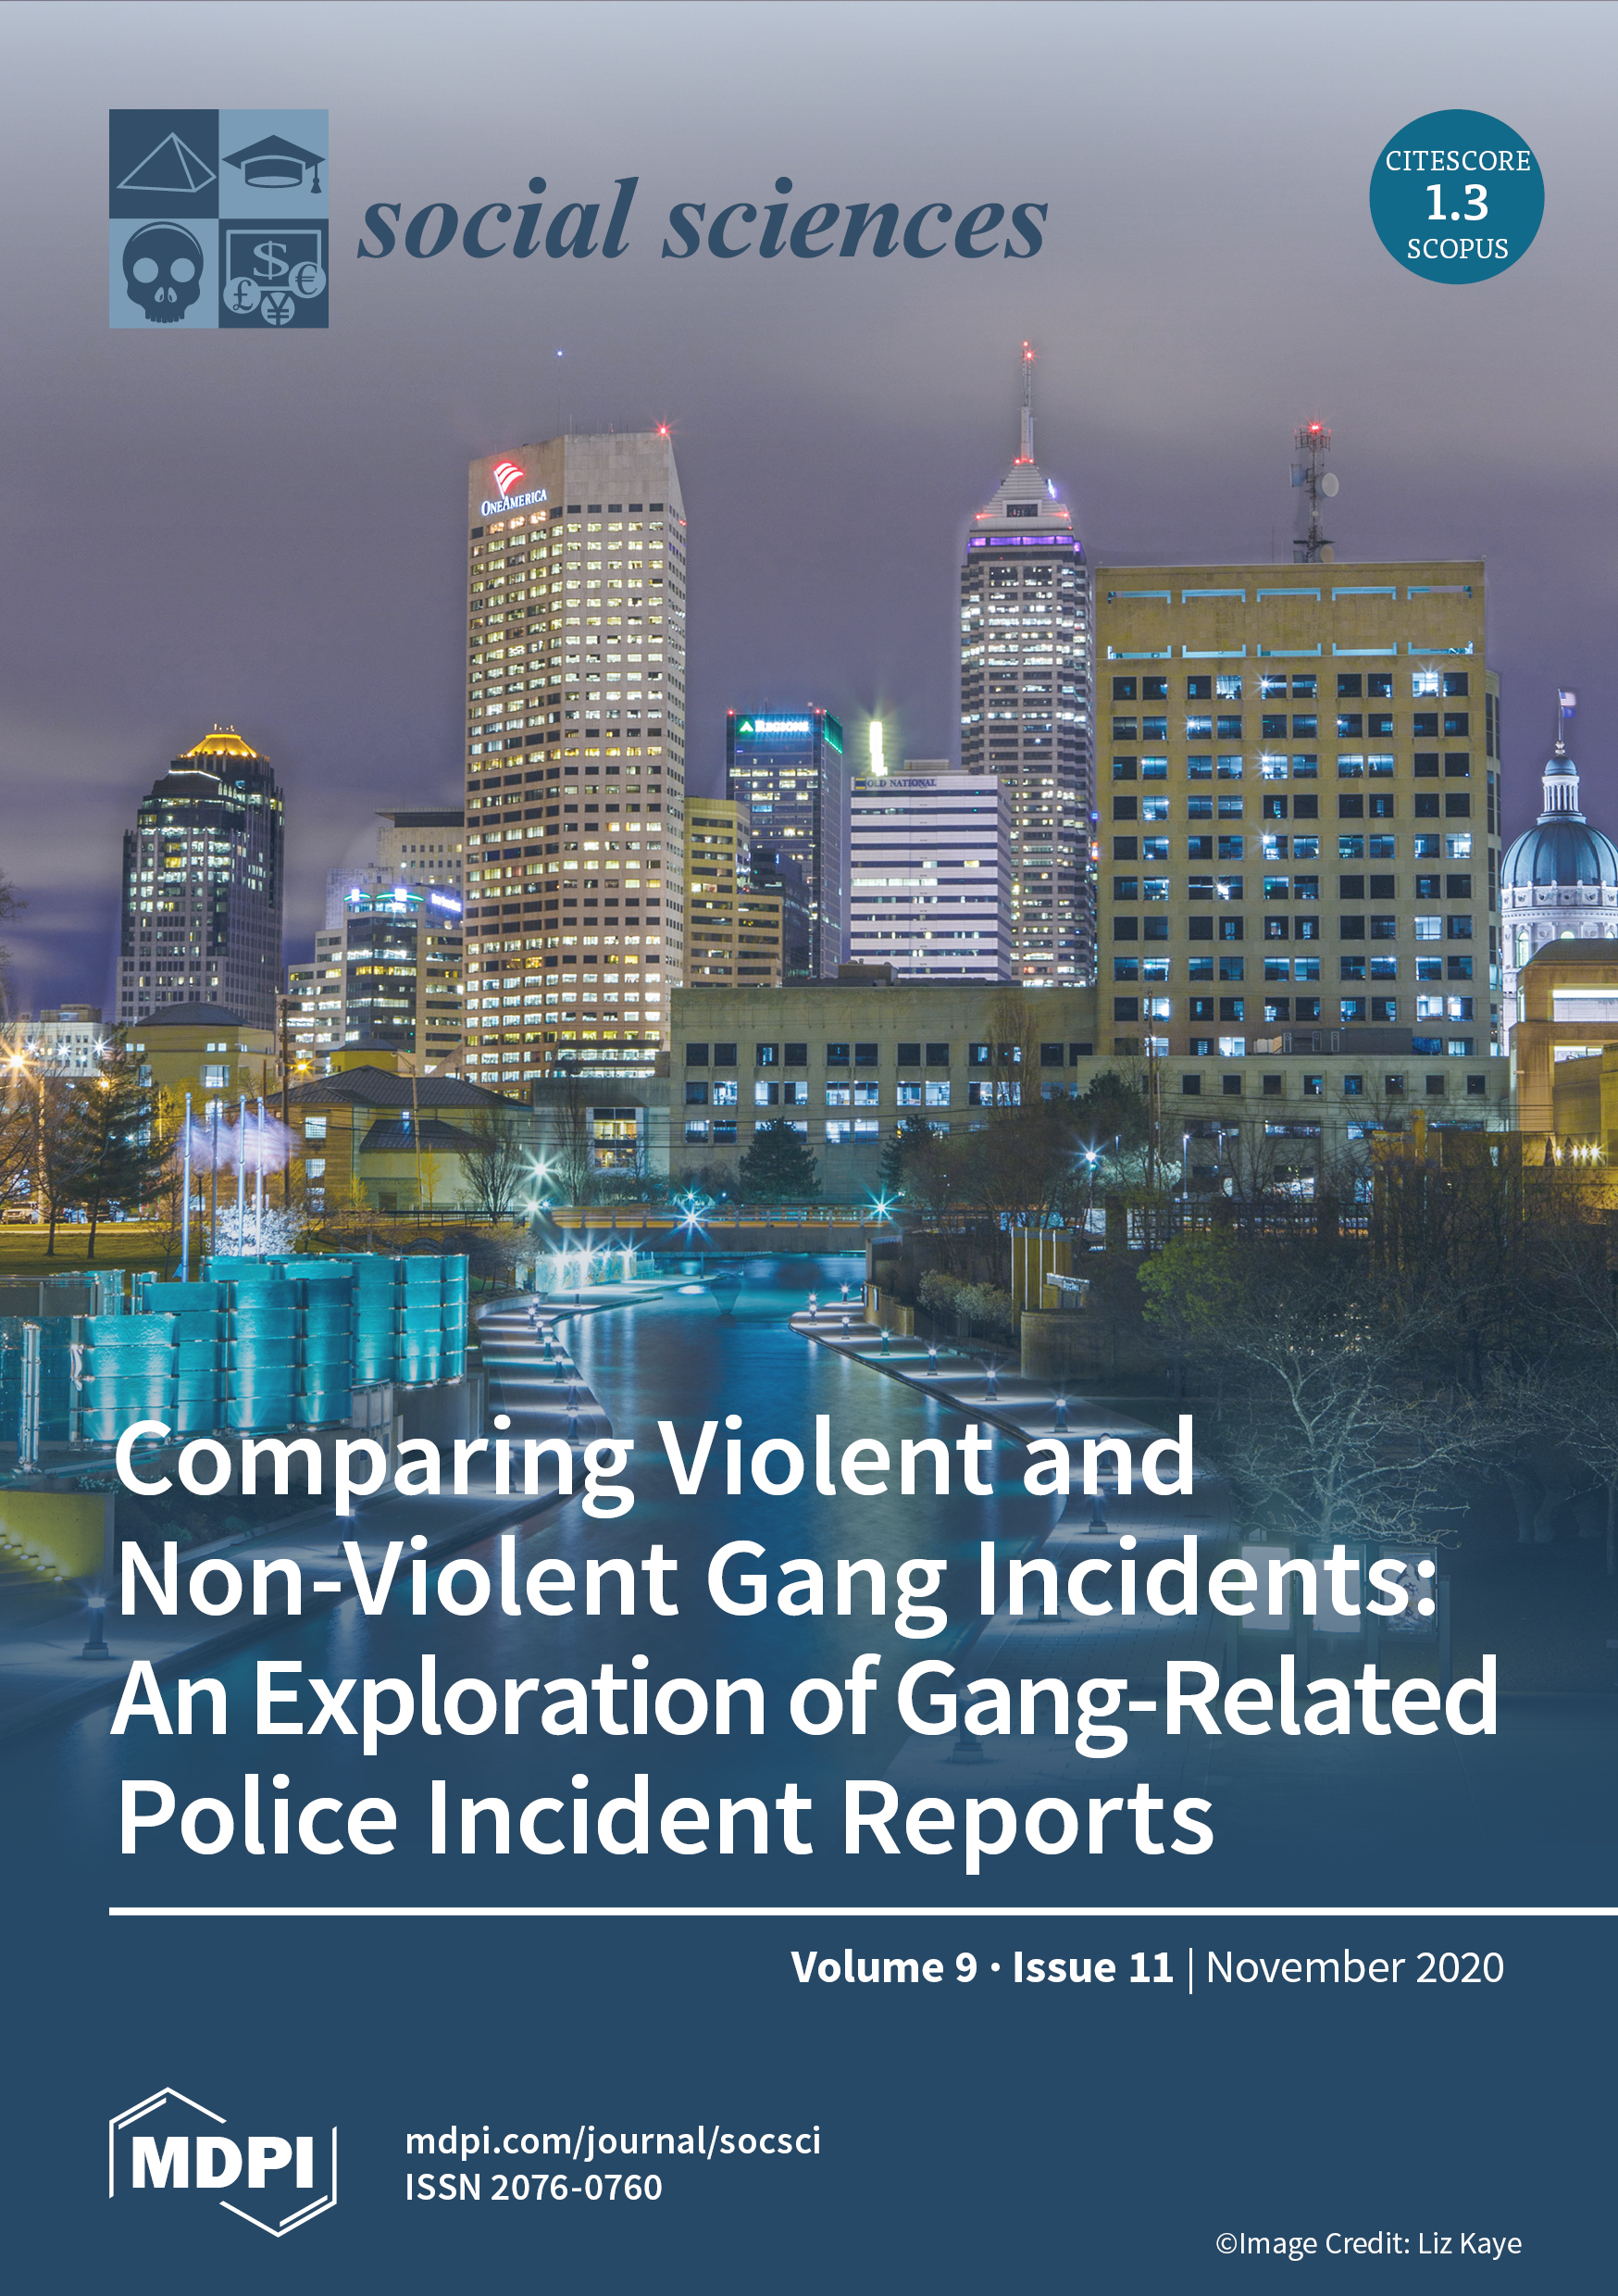 Comparing Violent and Non-Violent Gang Incidents: An Exploration of Gang-Related Police Incident Reports